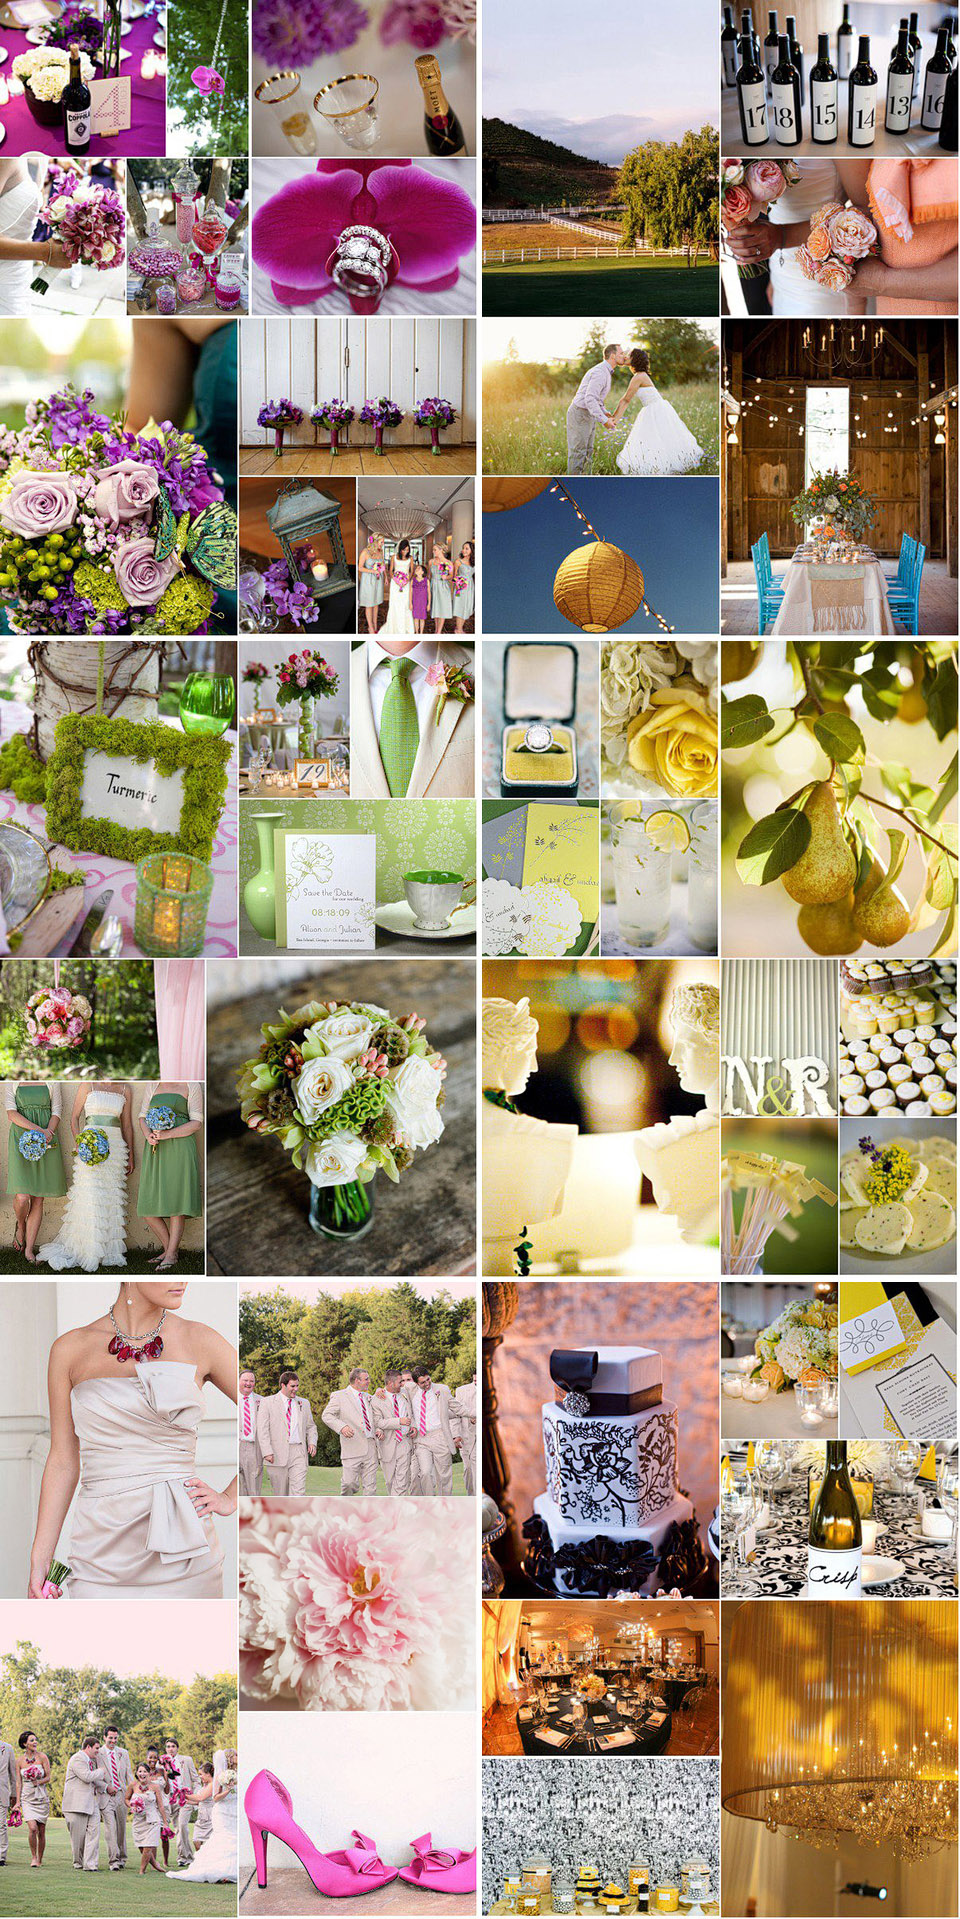 StyleMePretty, Choosing Wedding Colors, Wedding Colors, Ideas, Wedding details, Greens, Black and Whites, Purples, Pinks, Soft colors, Rustic wedding, Outdoor weddings